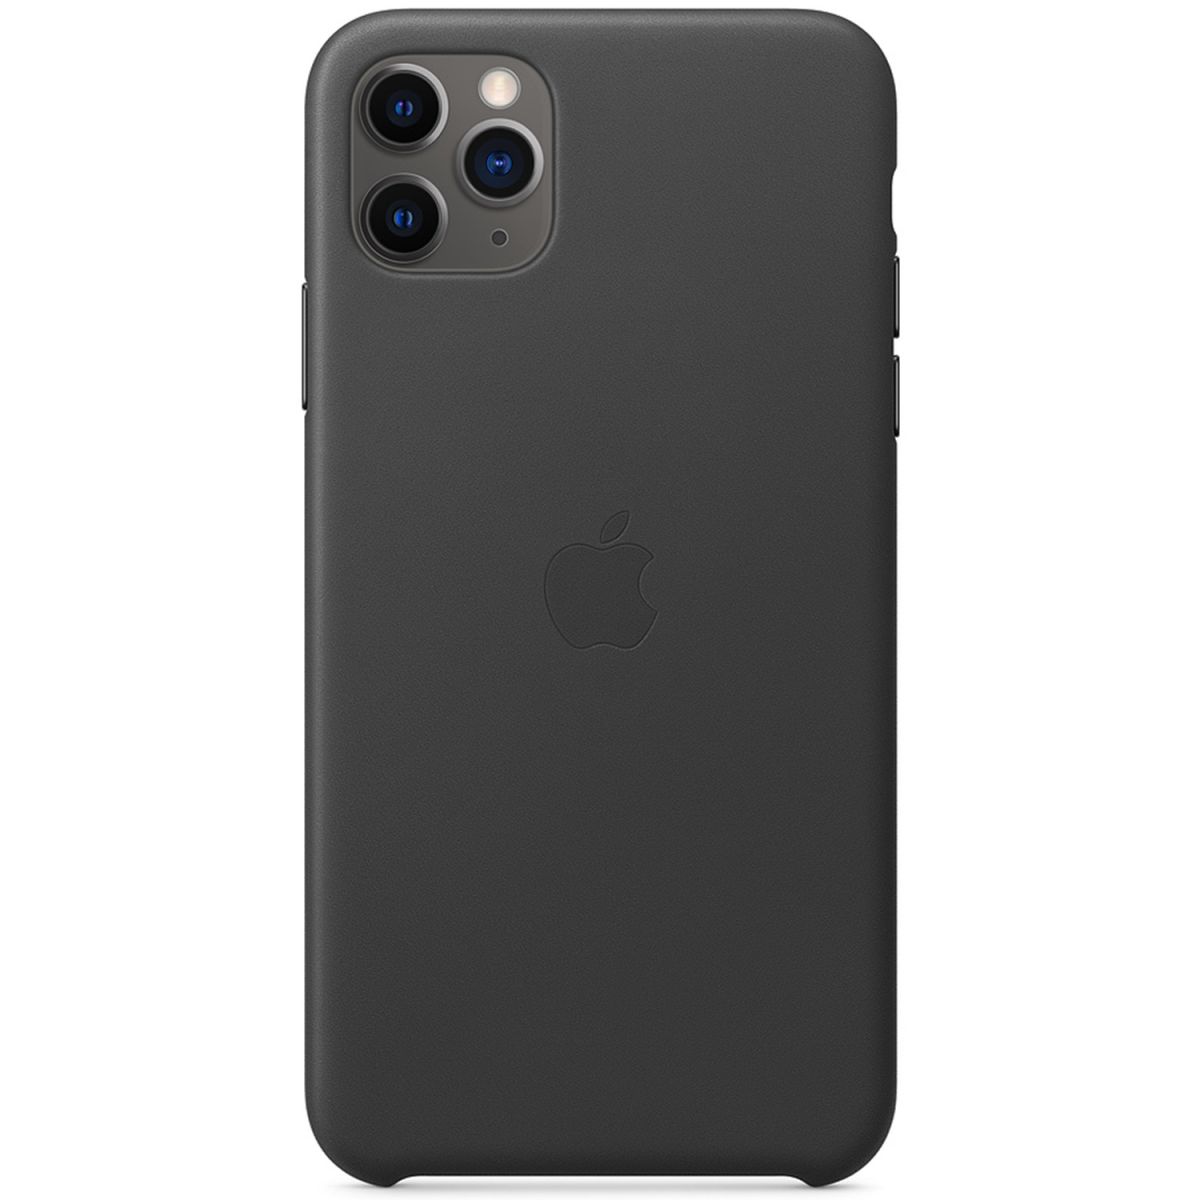 Apple Leather Backcover for iPhone 11 Pro Max - Black